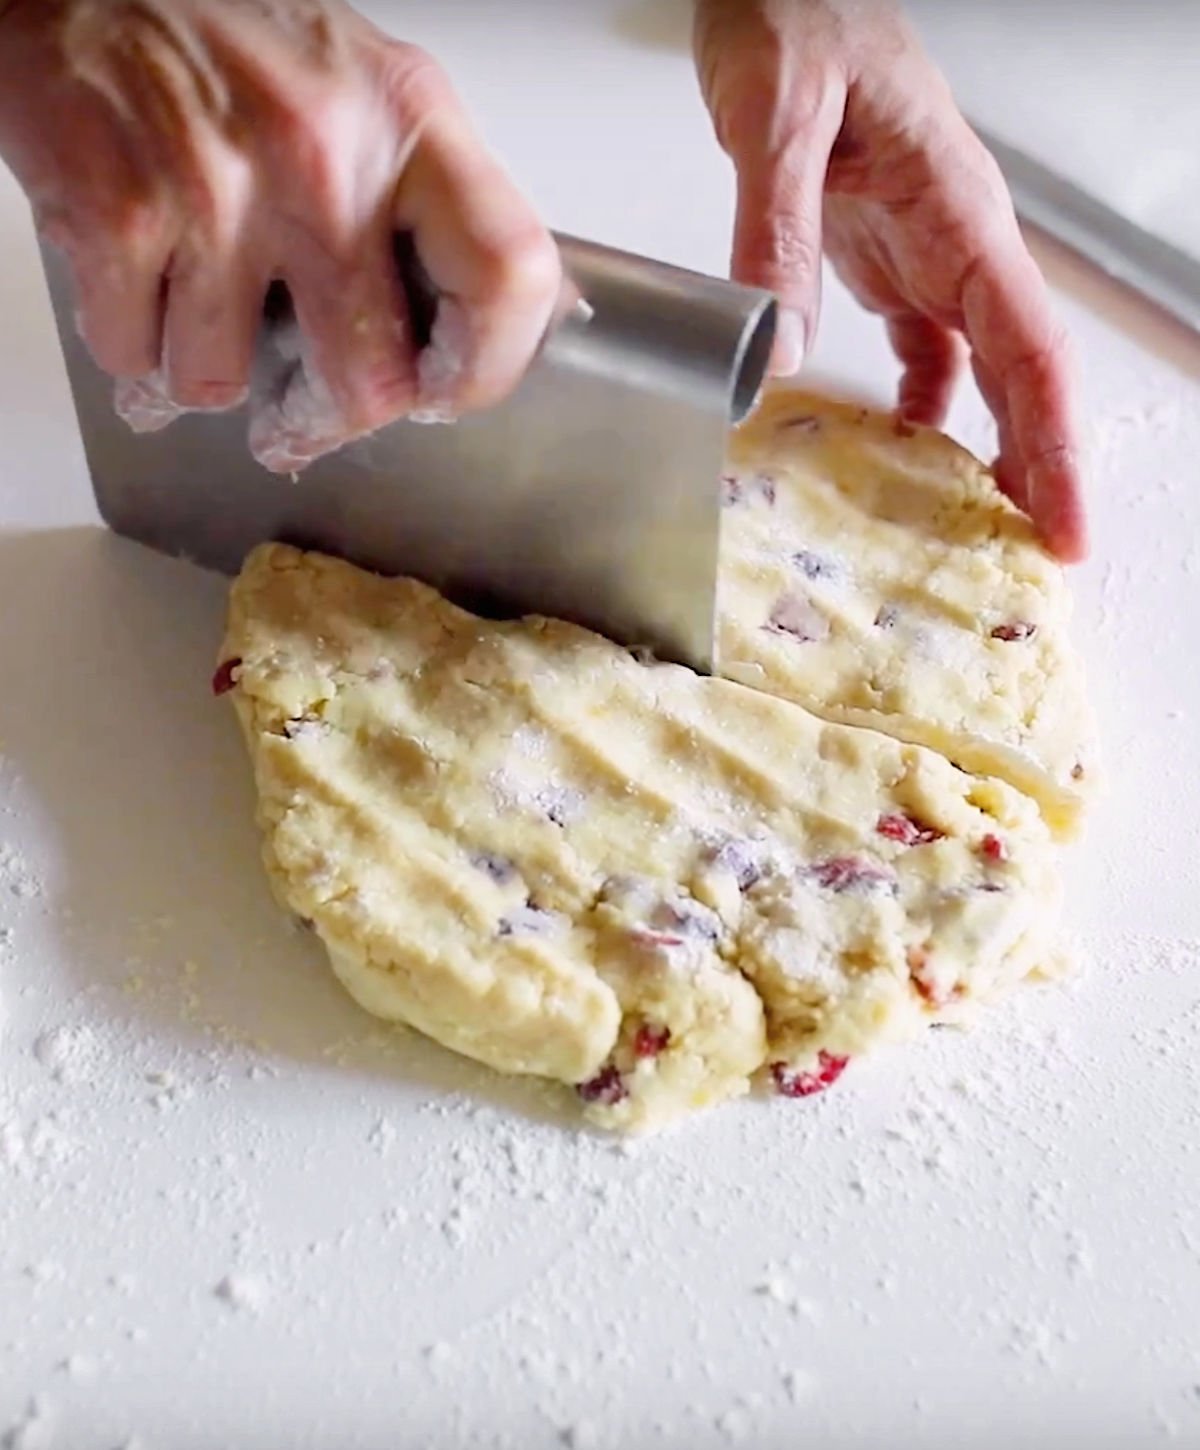 Cutting circle of cranberry scone dough on a white surface with a dough scraper.